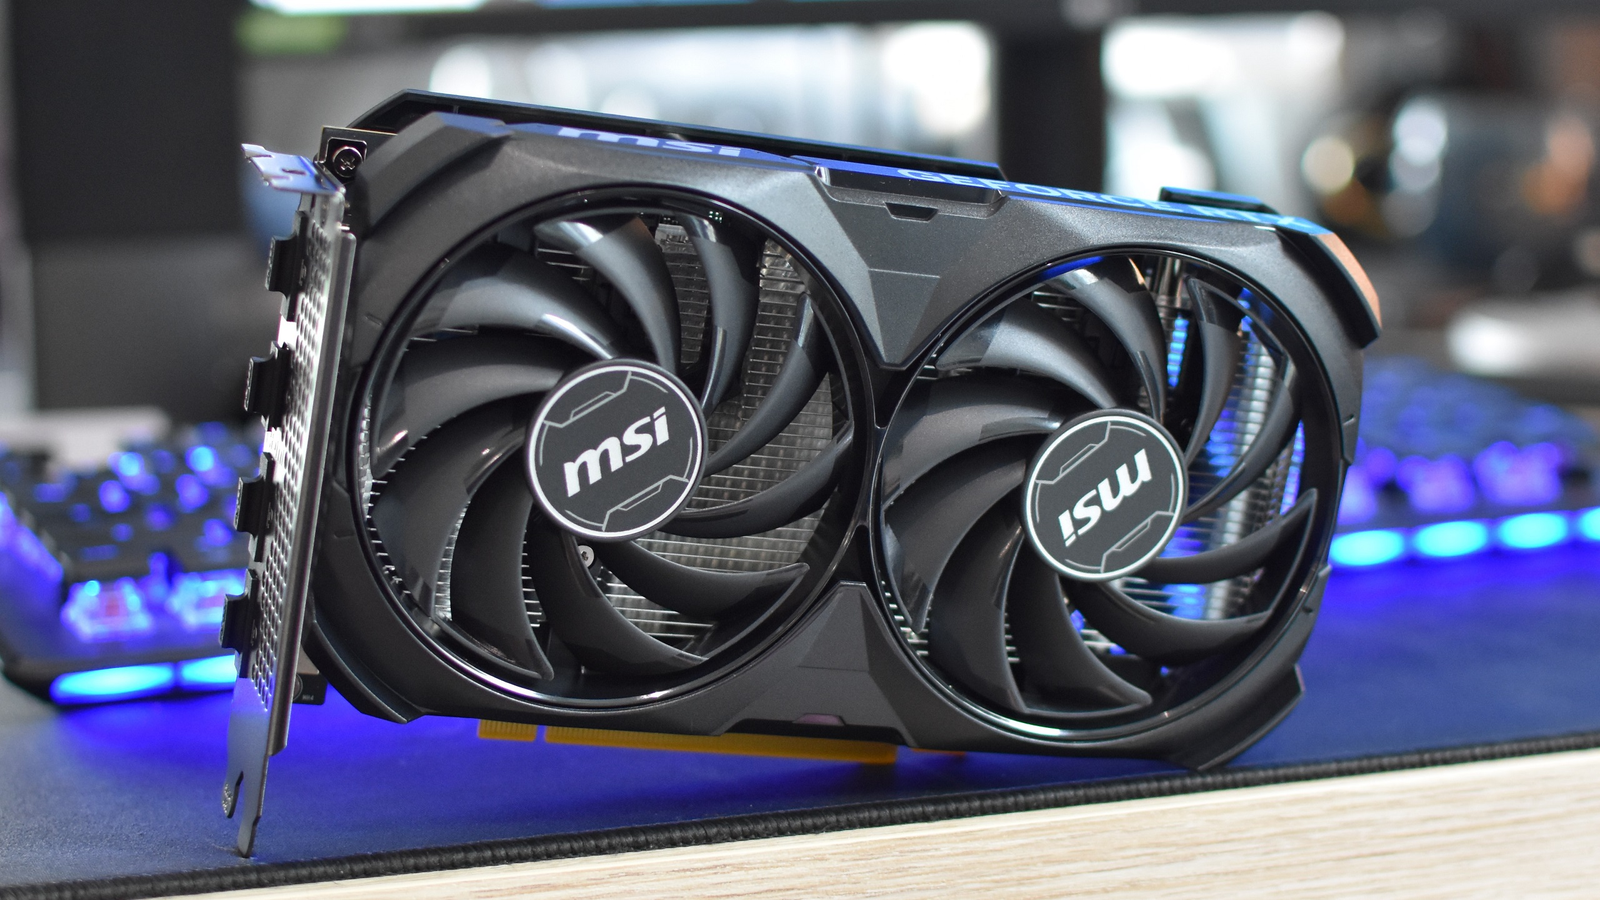 Nvidia GeForce RTX 4060 review: the least underwhelming 1080p